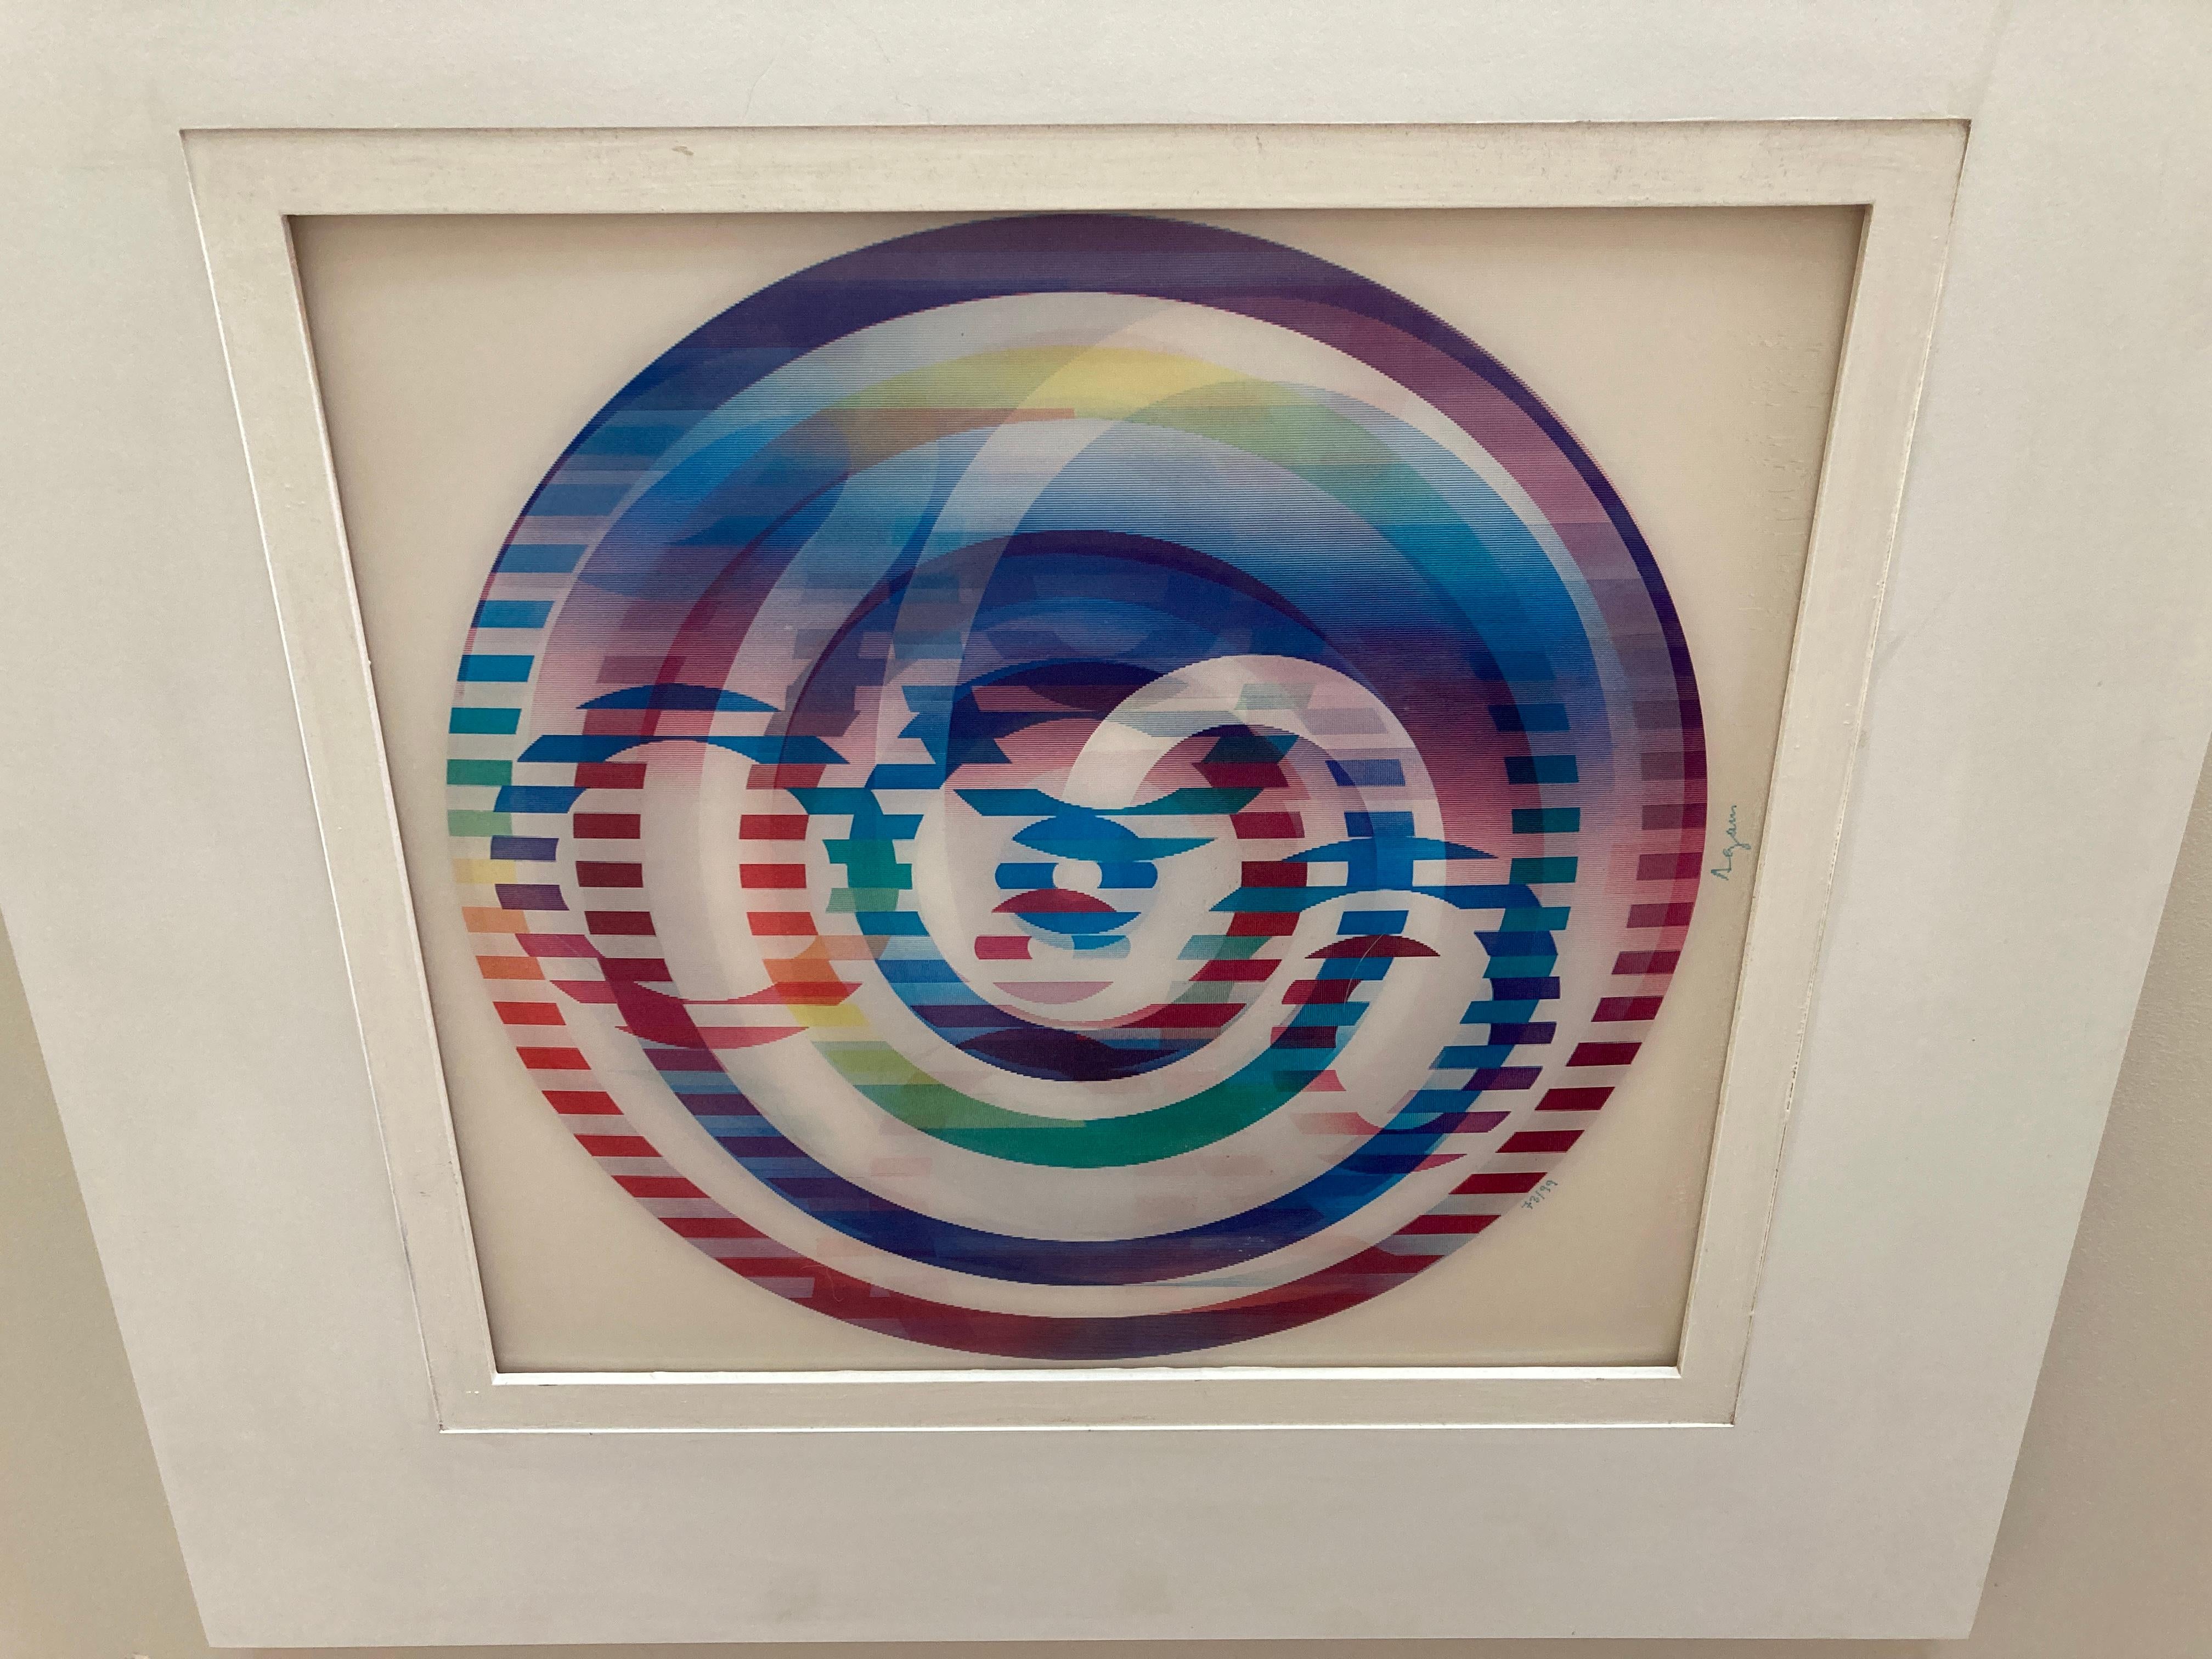 Yaacov Agam 'Image of the World' Signed, Limited Edition Lenticular Agamograph 4